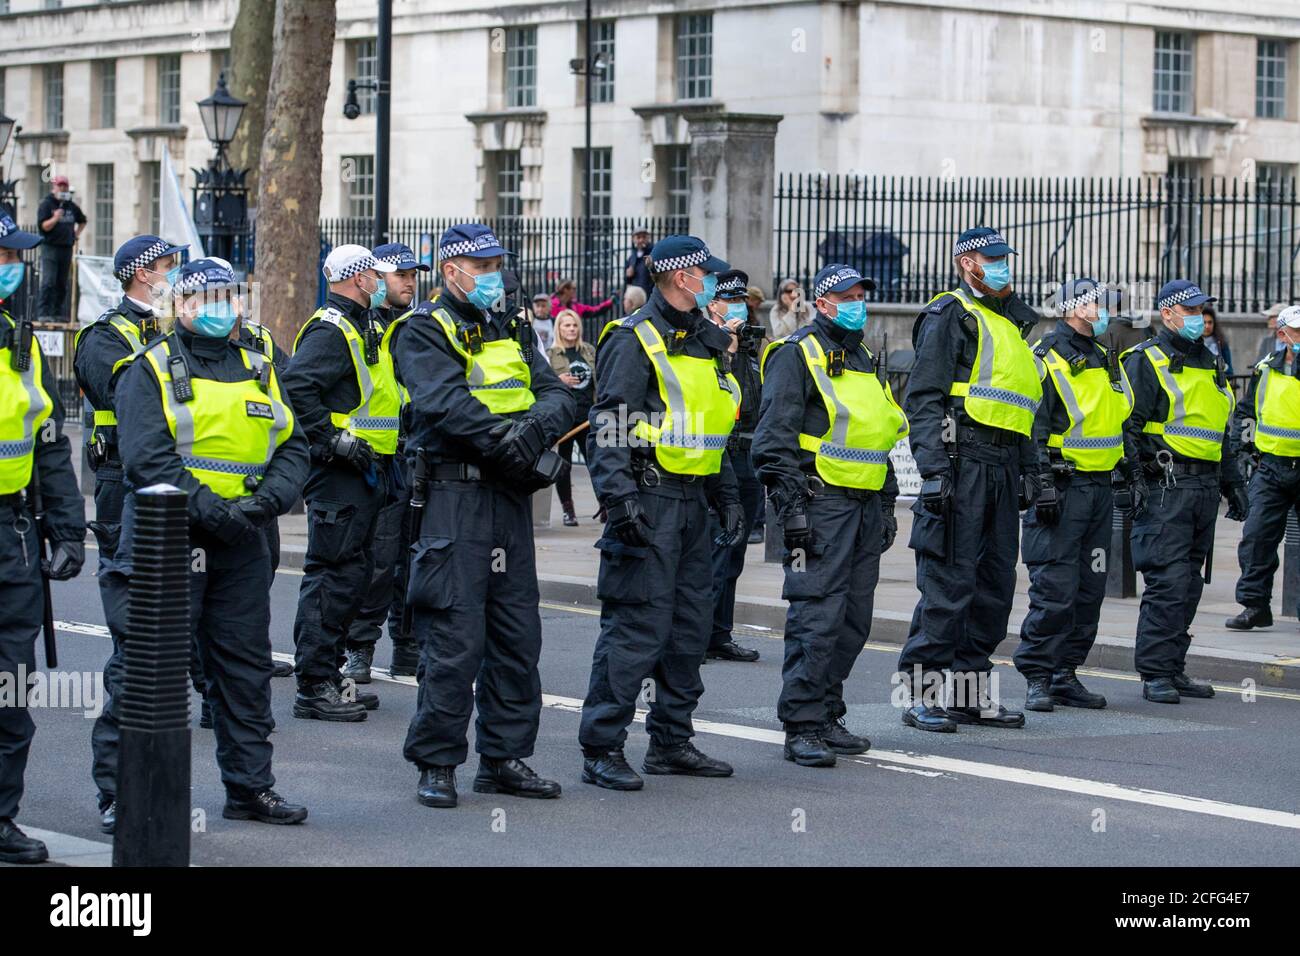 London 5th September 2020 A relatively peaceful 'Anti-Vaxx' rally outside Downing Street suddenly turned violent when police started to make arrests as the rally broke up. City of London public order police formed a cordon forcing everyone up Westminster towards the Houses of Parliament. Credit: Ian Davidson/Alamy Live News Stock Photo